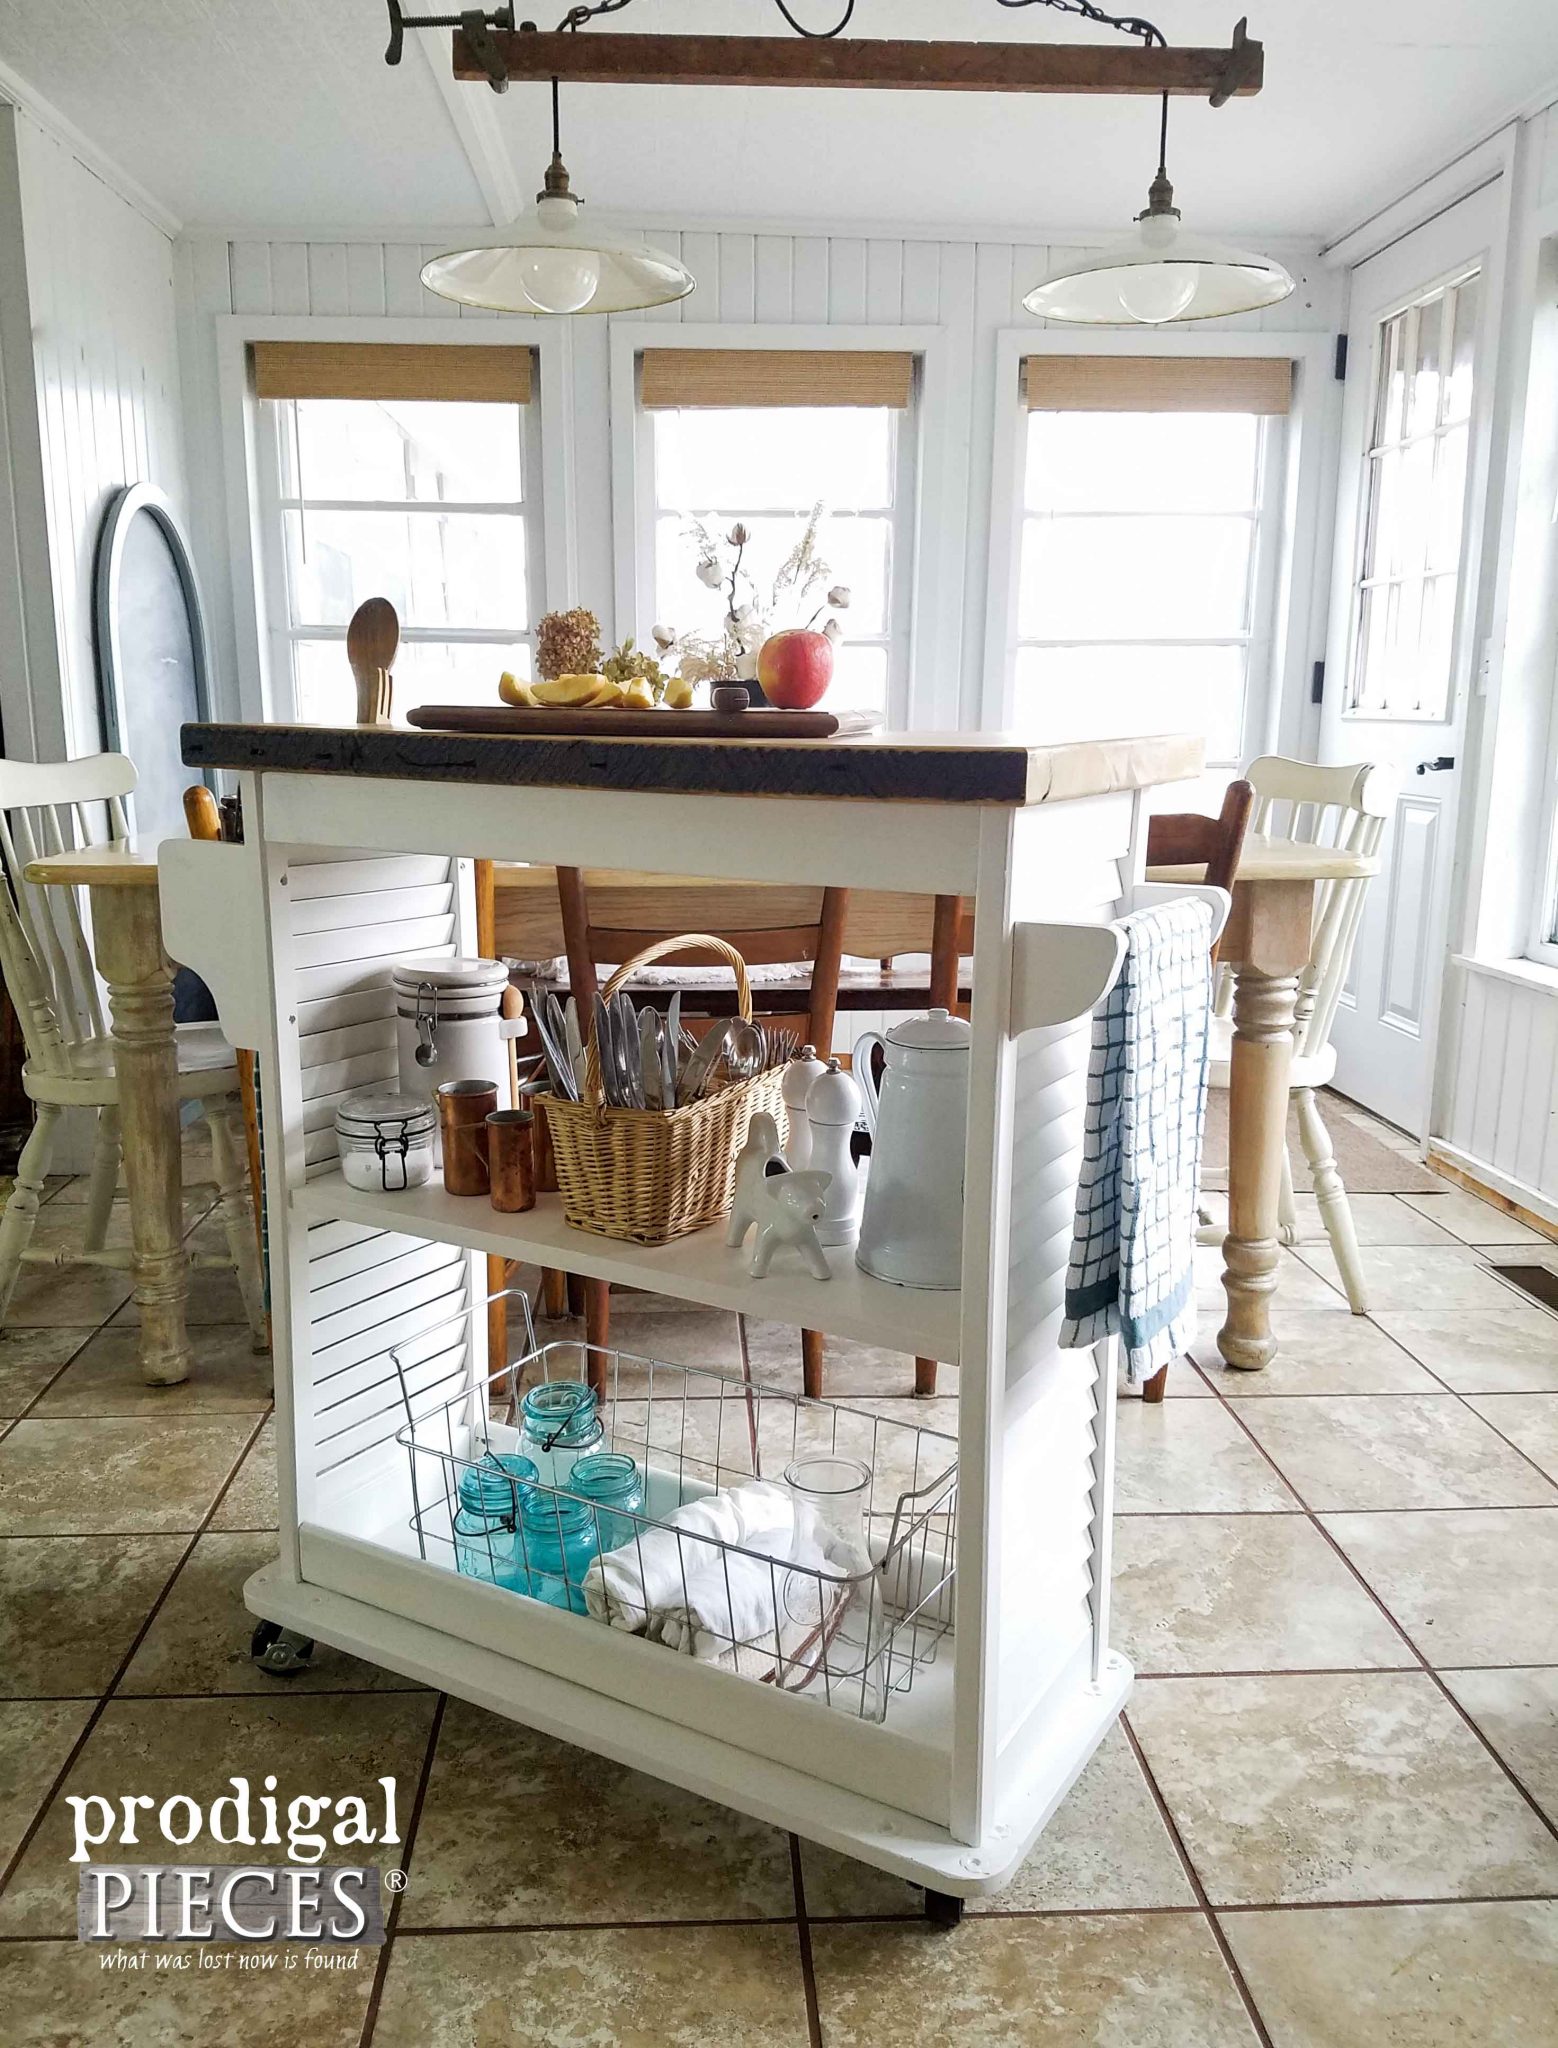 Towel Bars and Ample Storage Featured on this Upcycled Kitchen Island Cart by Prodigal Pieces | prodigalpieces.com